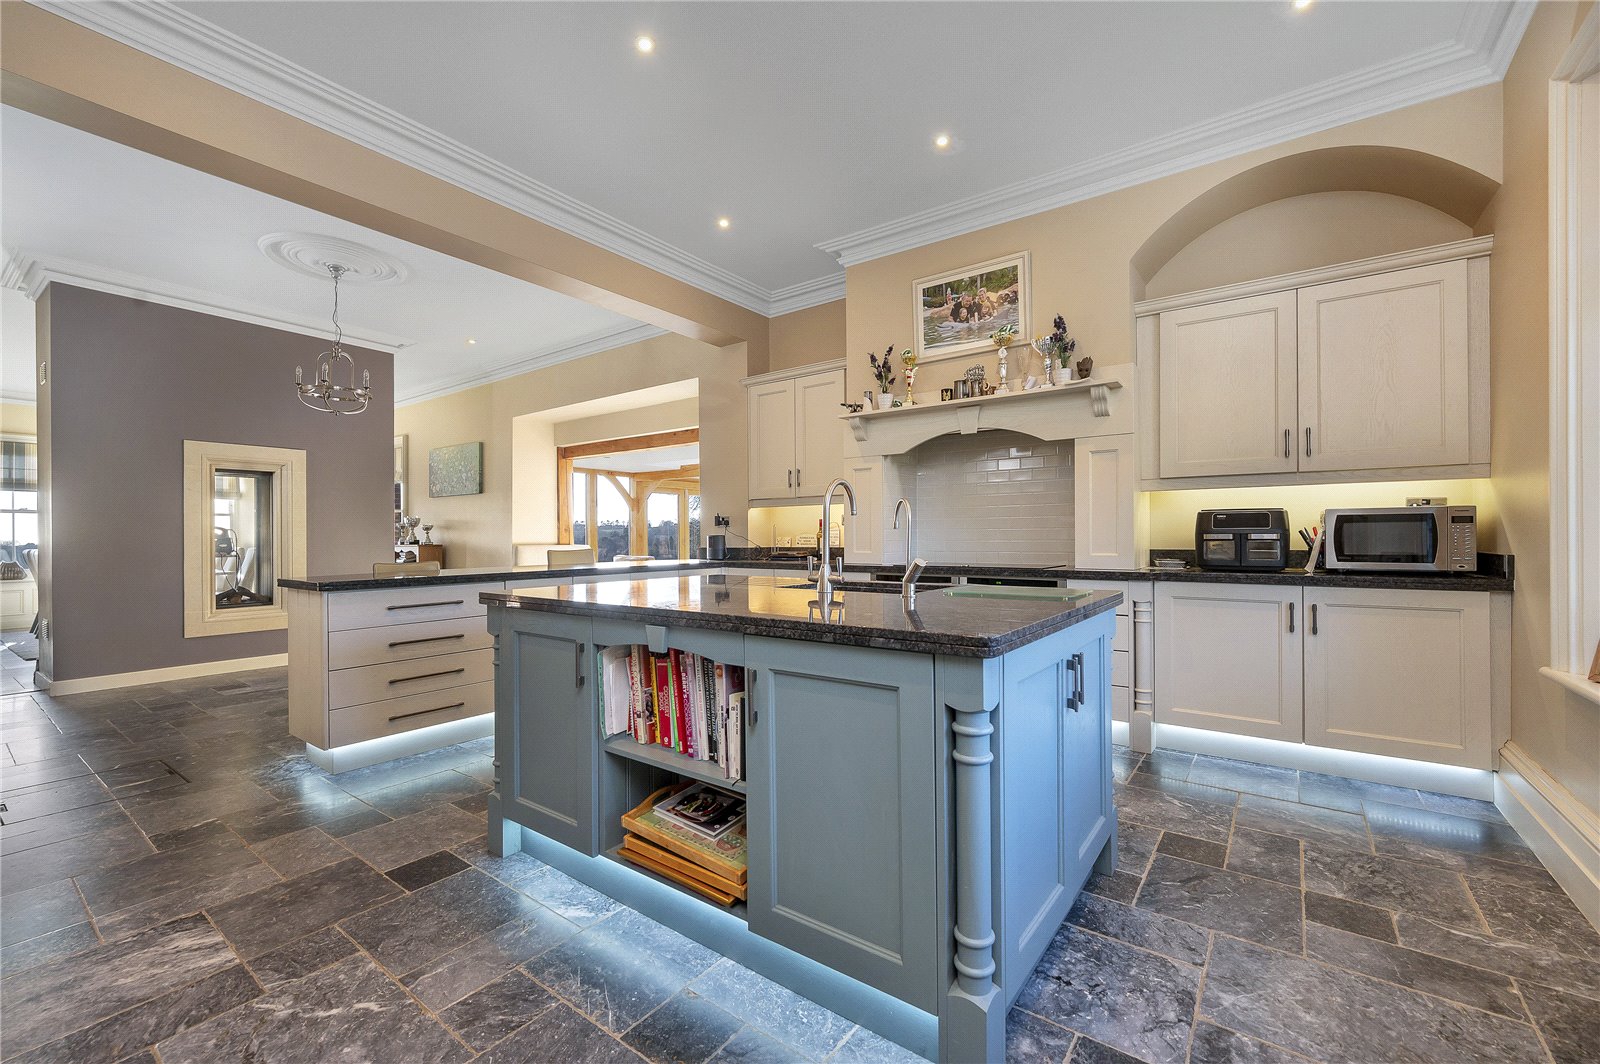 Ulverscroft, Leicestershire, 5 bedrooms - kitchens